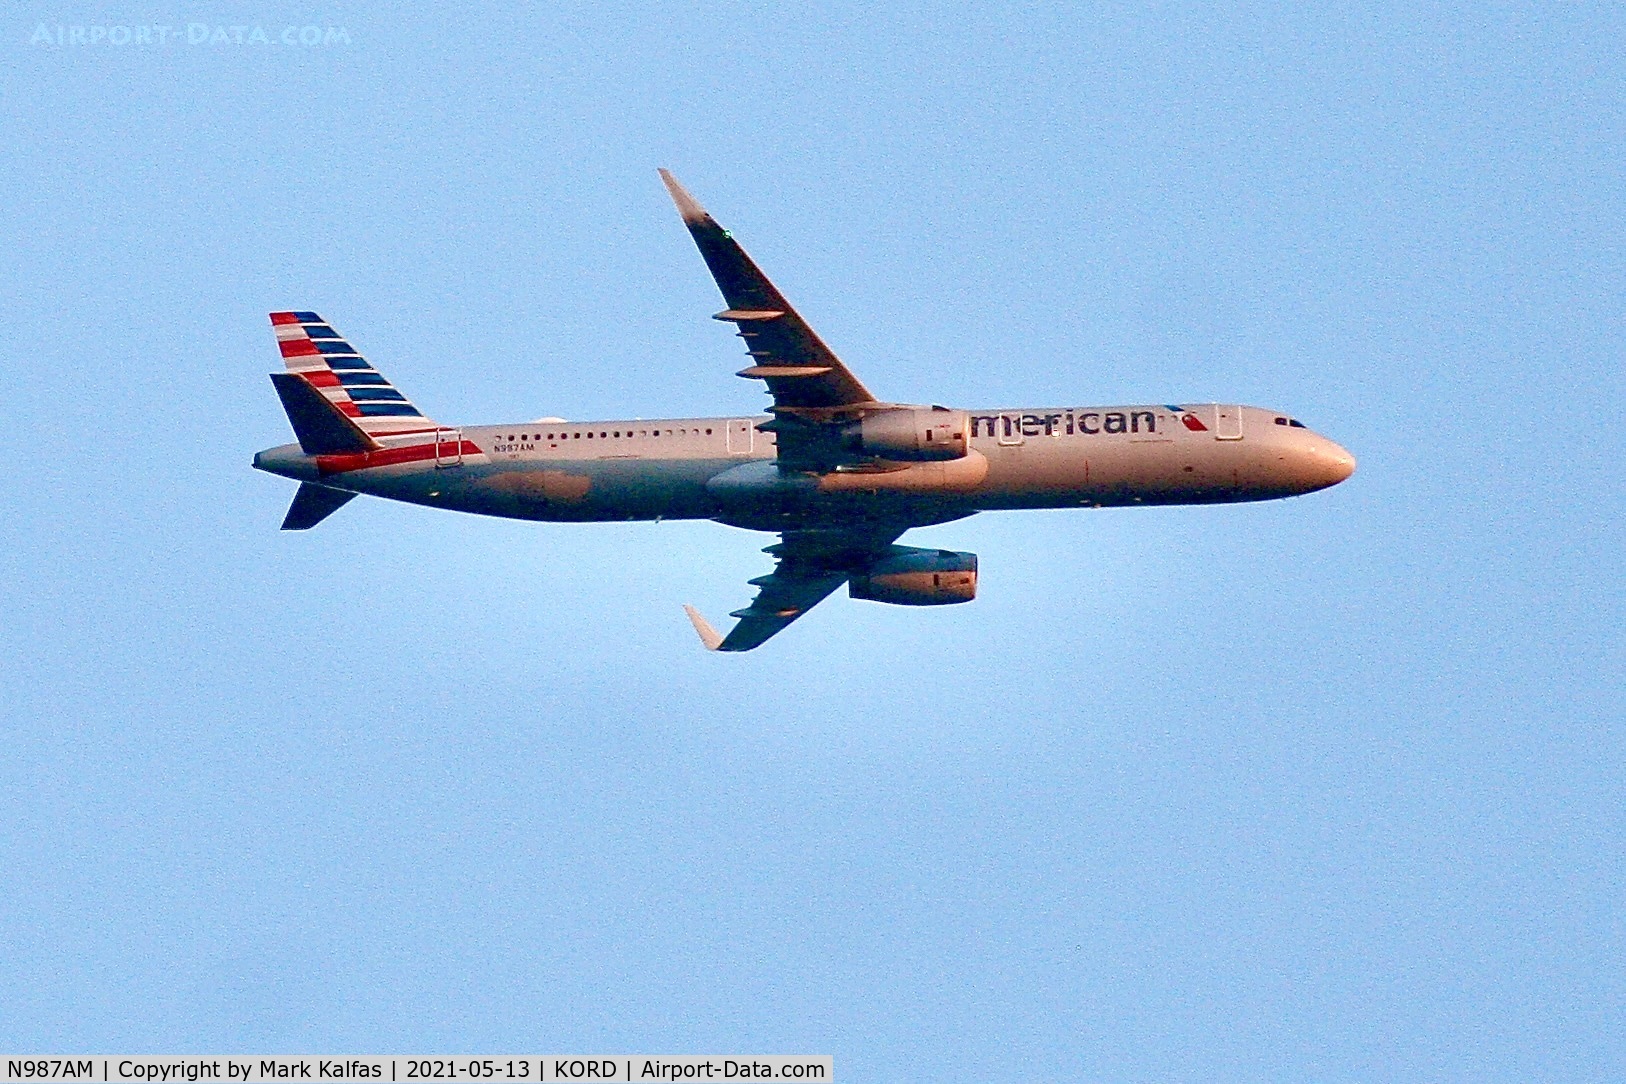 N987AM, 2016 Airbus A321-231 C/N 7079, American A321 N987AM on approach to KORD